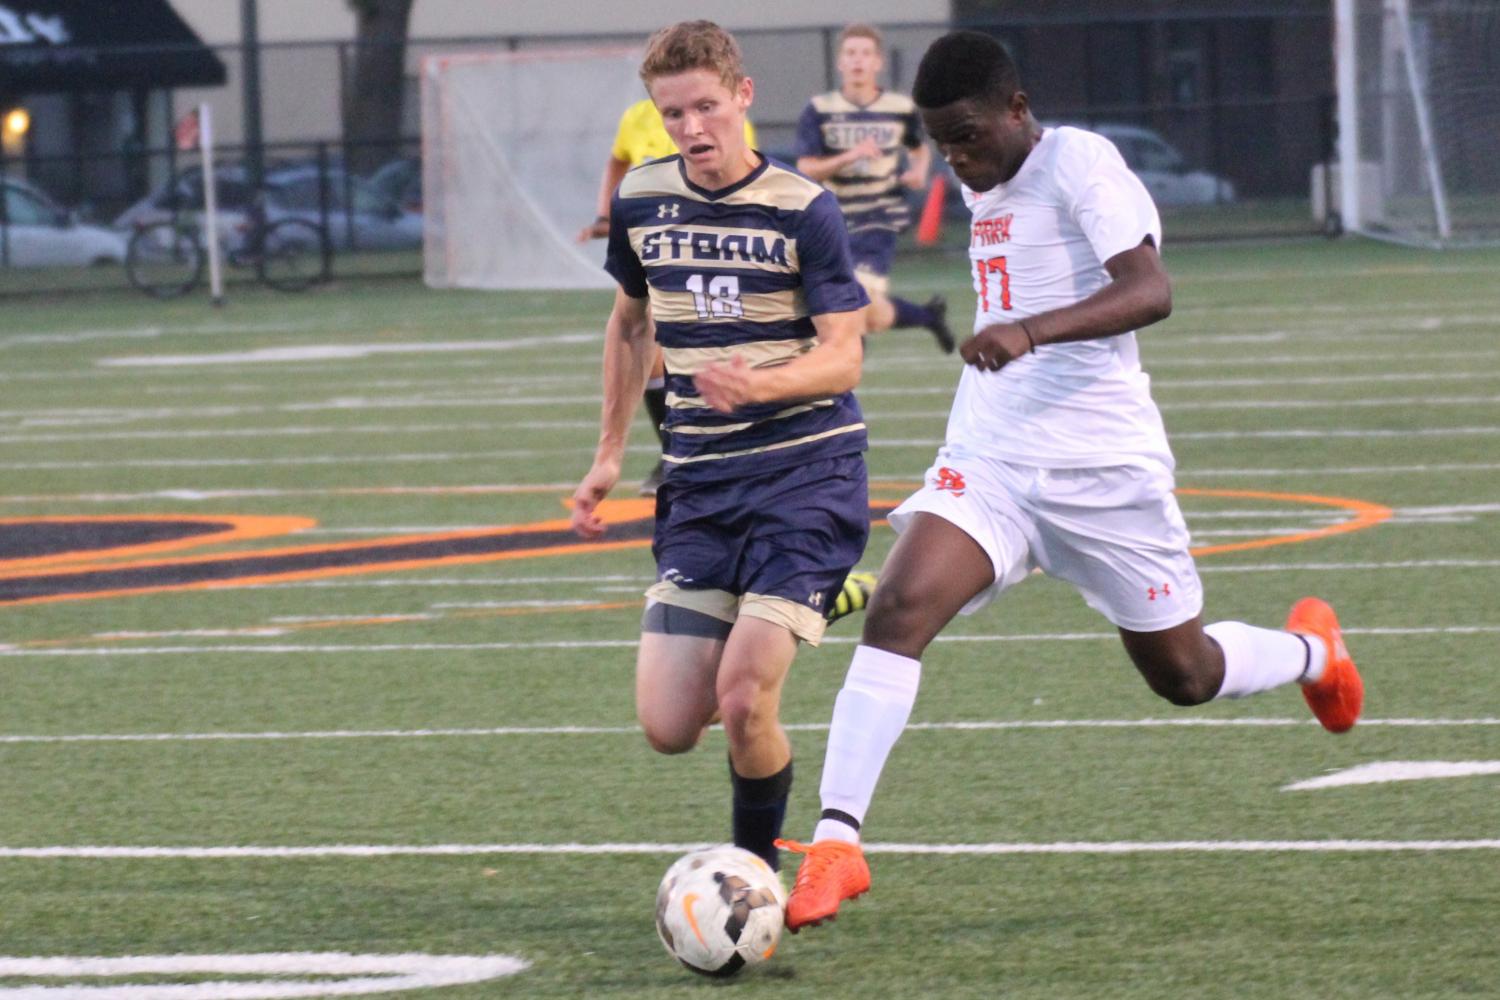 Sophomore Randy Mayele fights for the ball with a Chanhassen player. Boys Varsity tied in overtime on September 14.